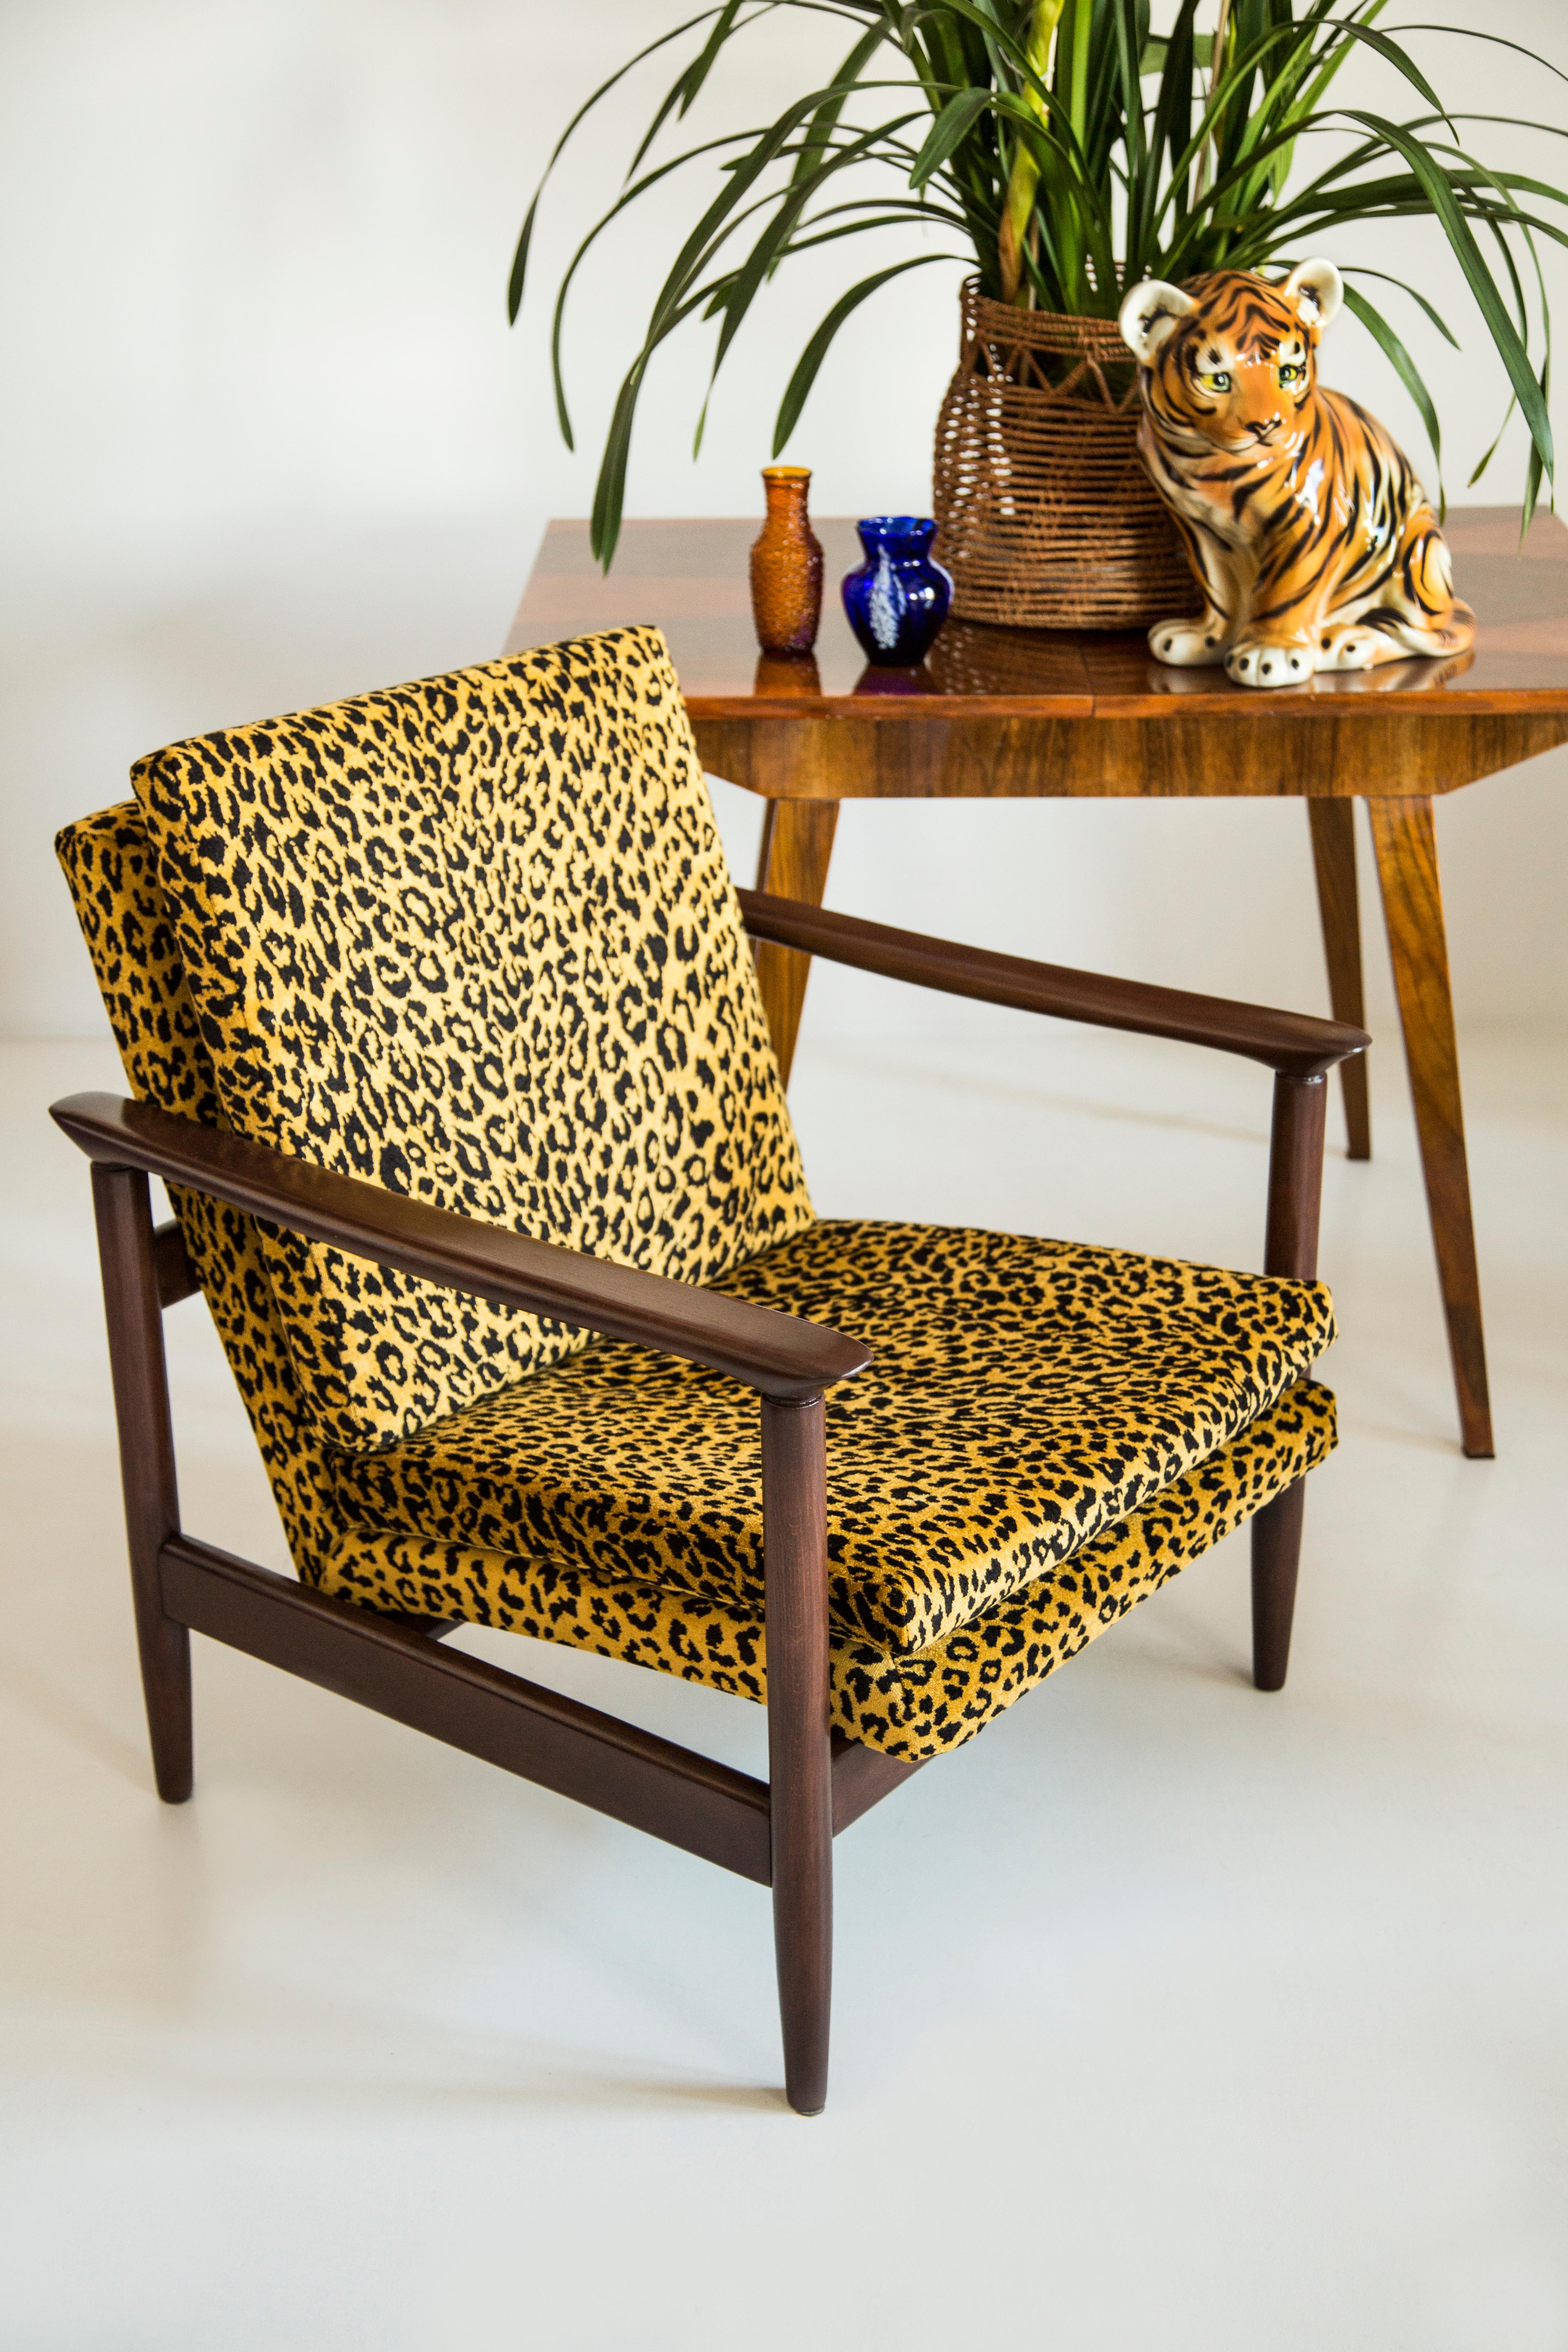 Hand-Crafted Midcentury Leopard Armchair, GFM 142, Edmund Homa, Europe, 1960s For Sale